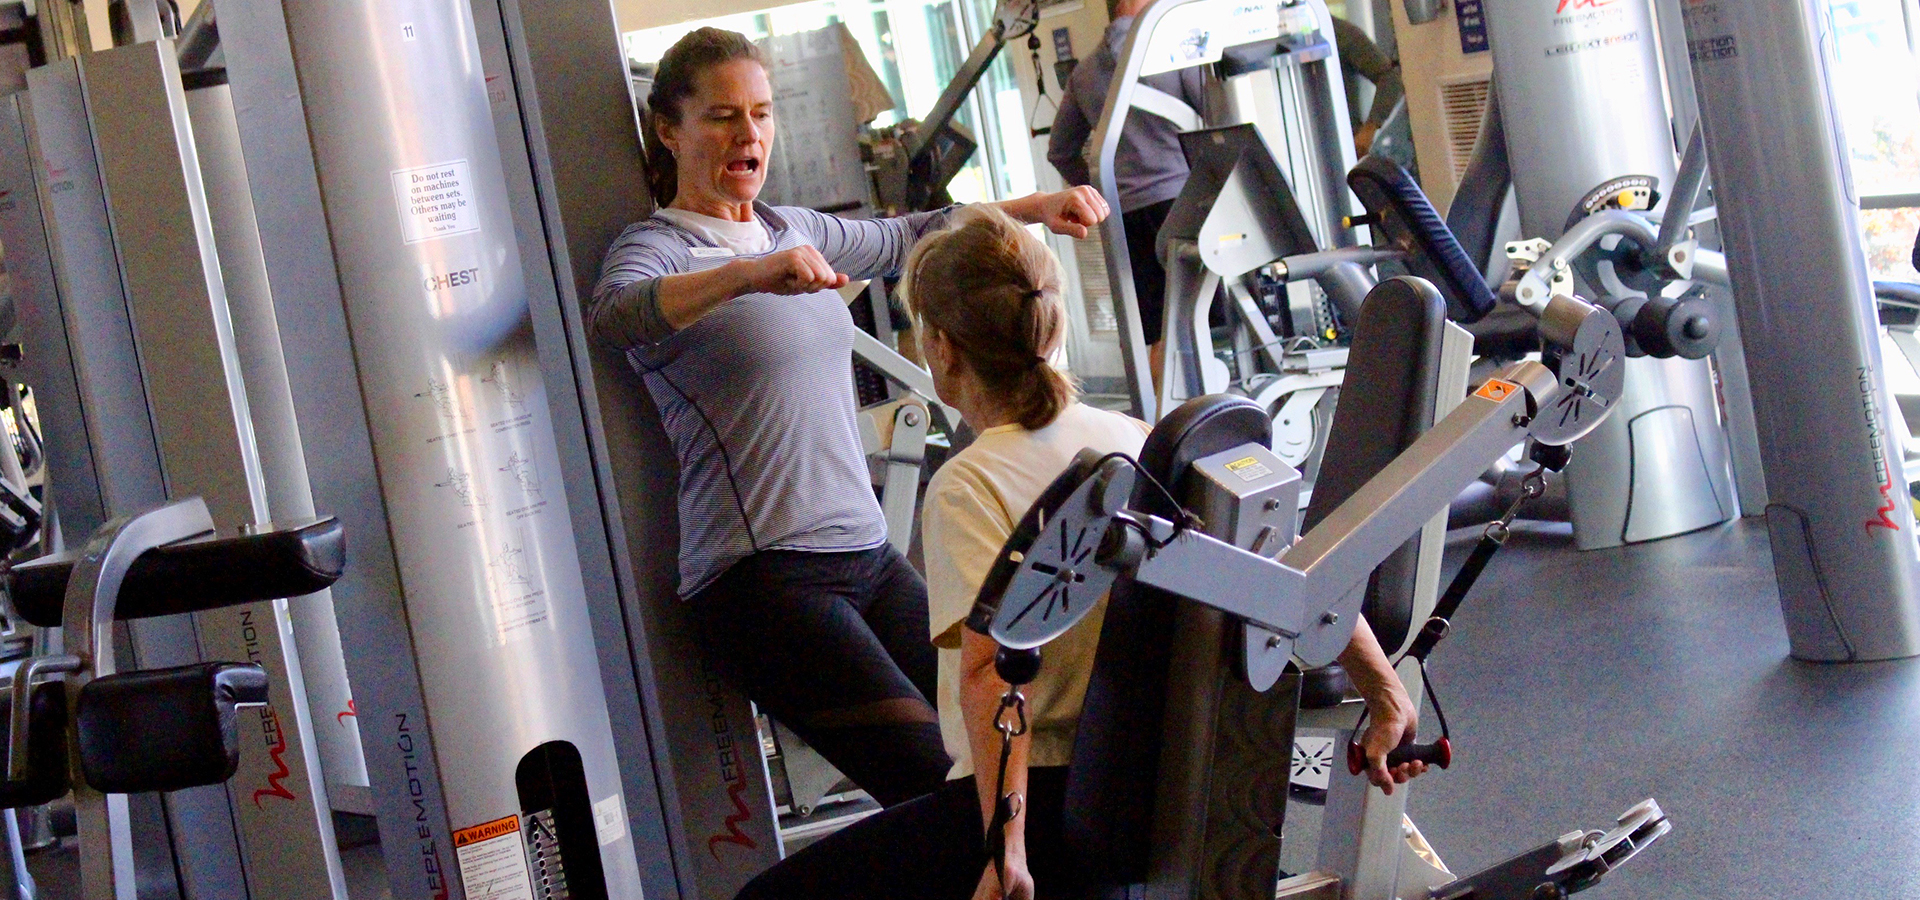 A personal trainer working with someone in the fitness center.